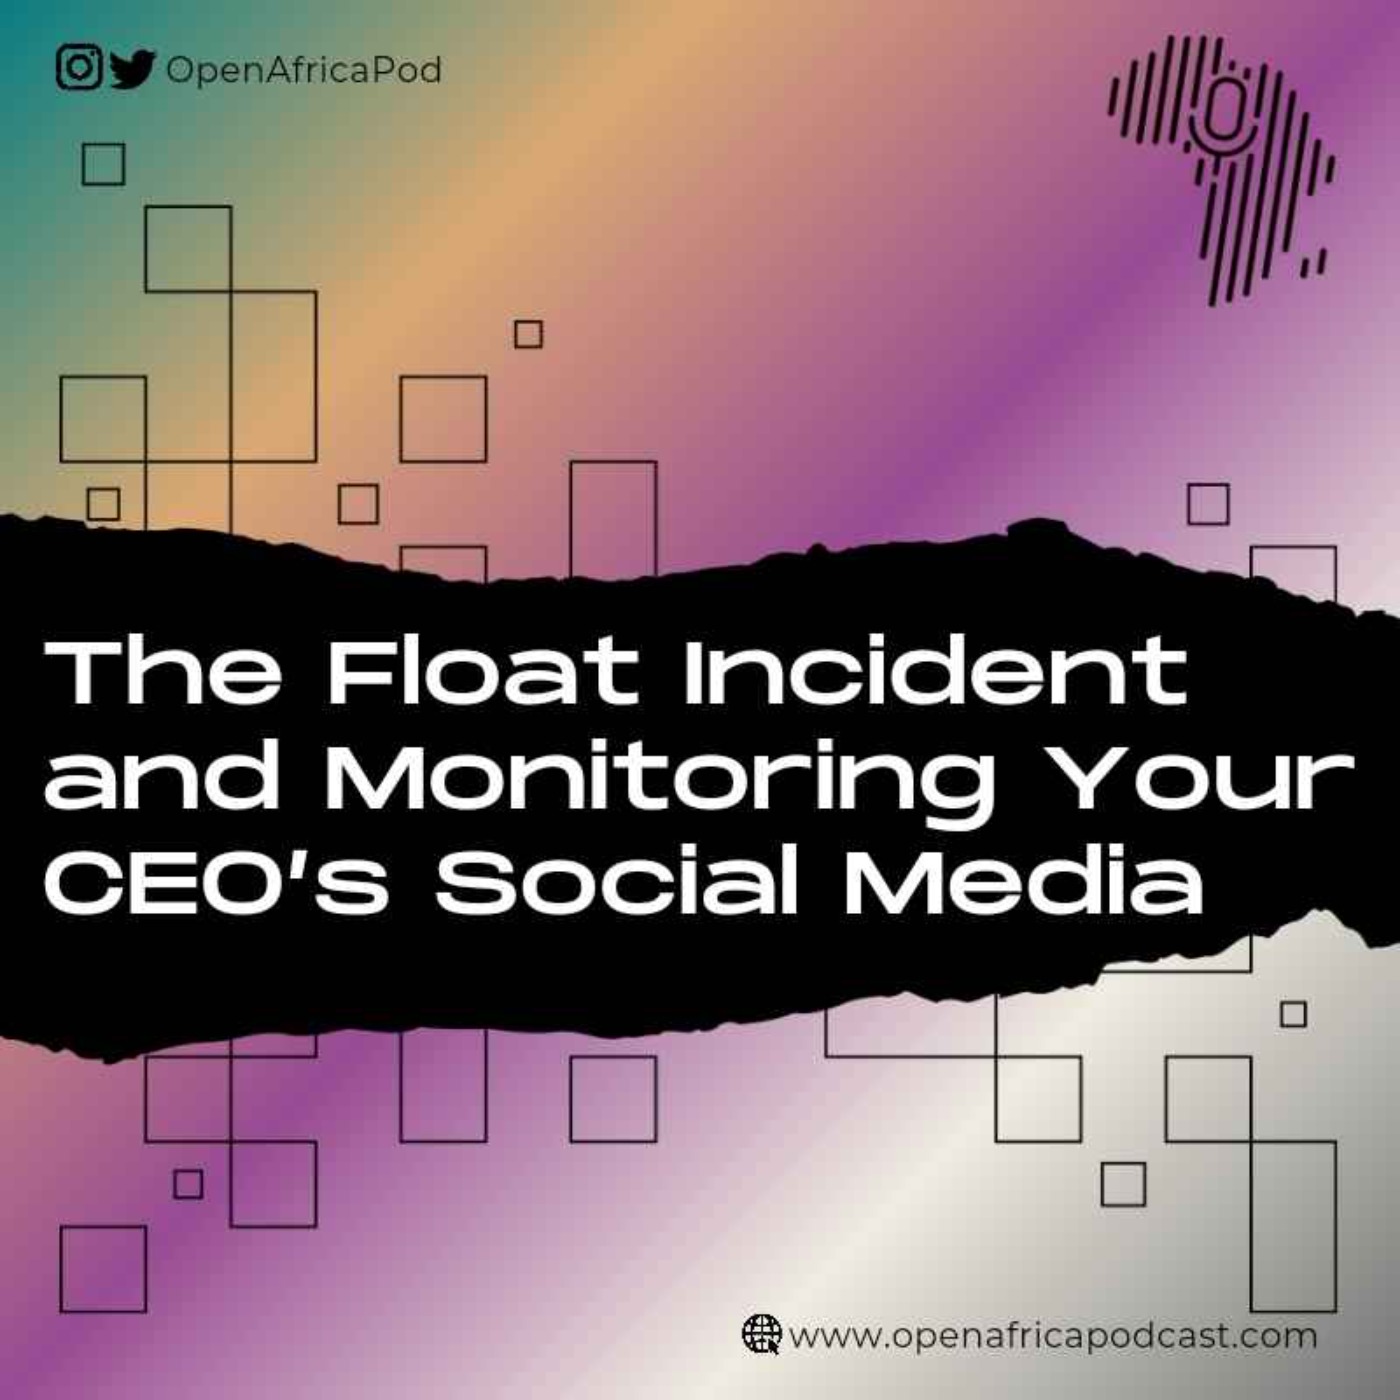 The Float Incident and Monitoring Your CEO’s Social Media